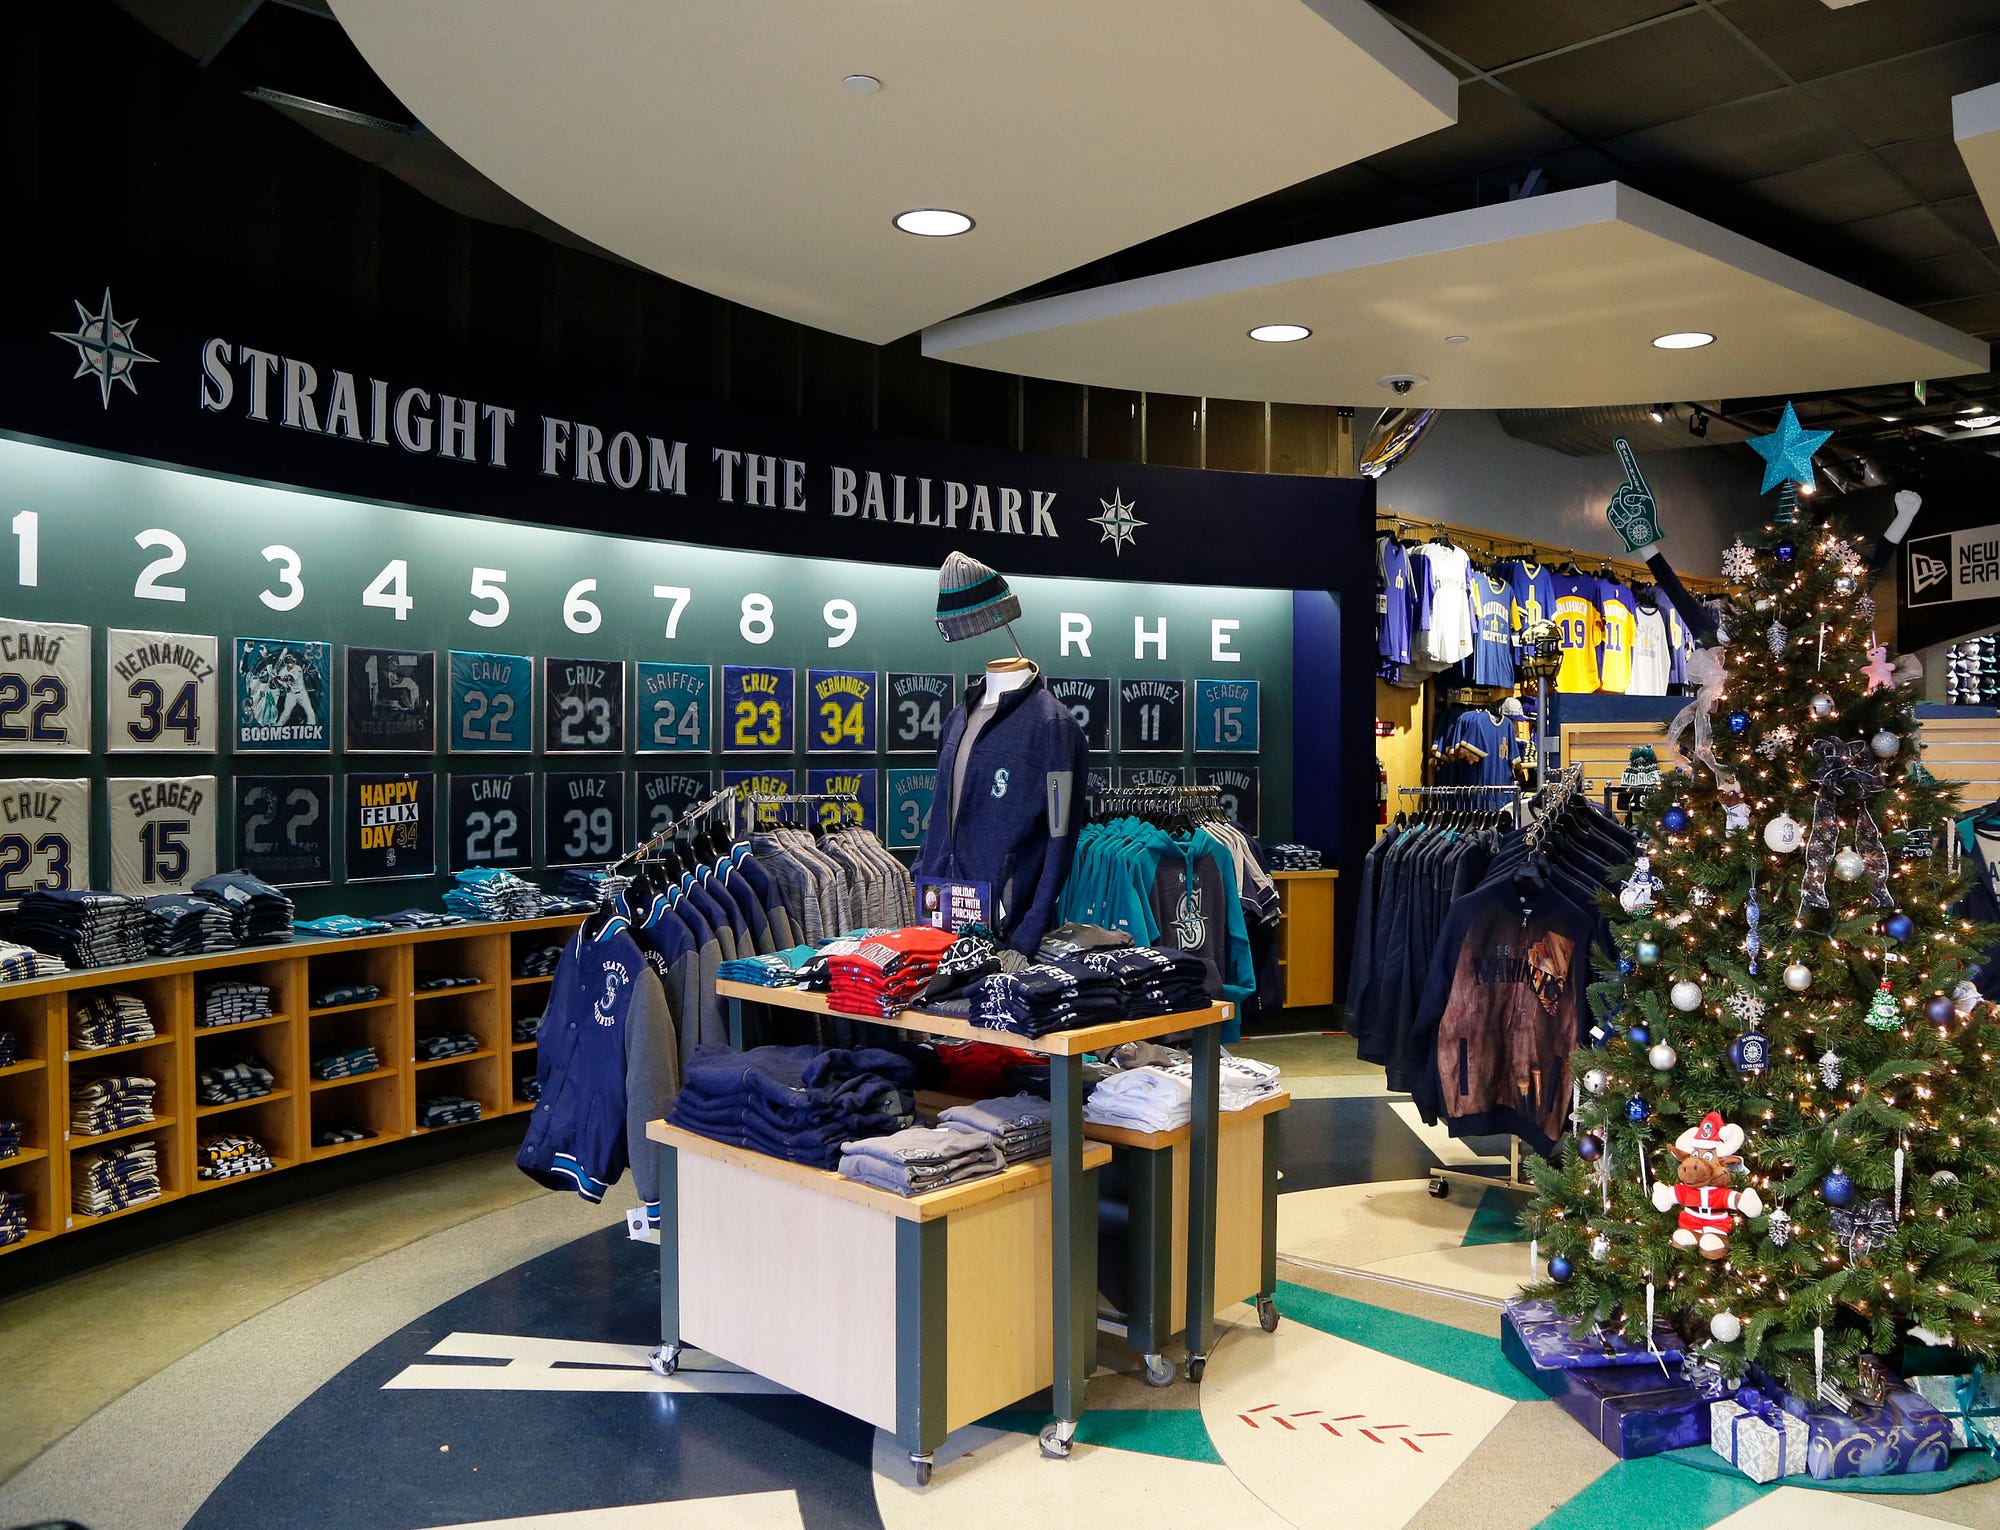 Holiday Events at Mariners Team Stores